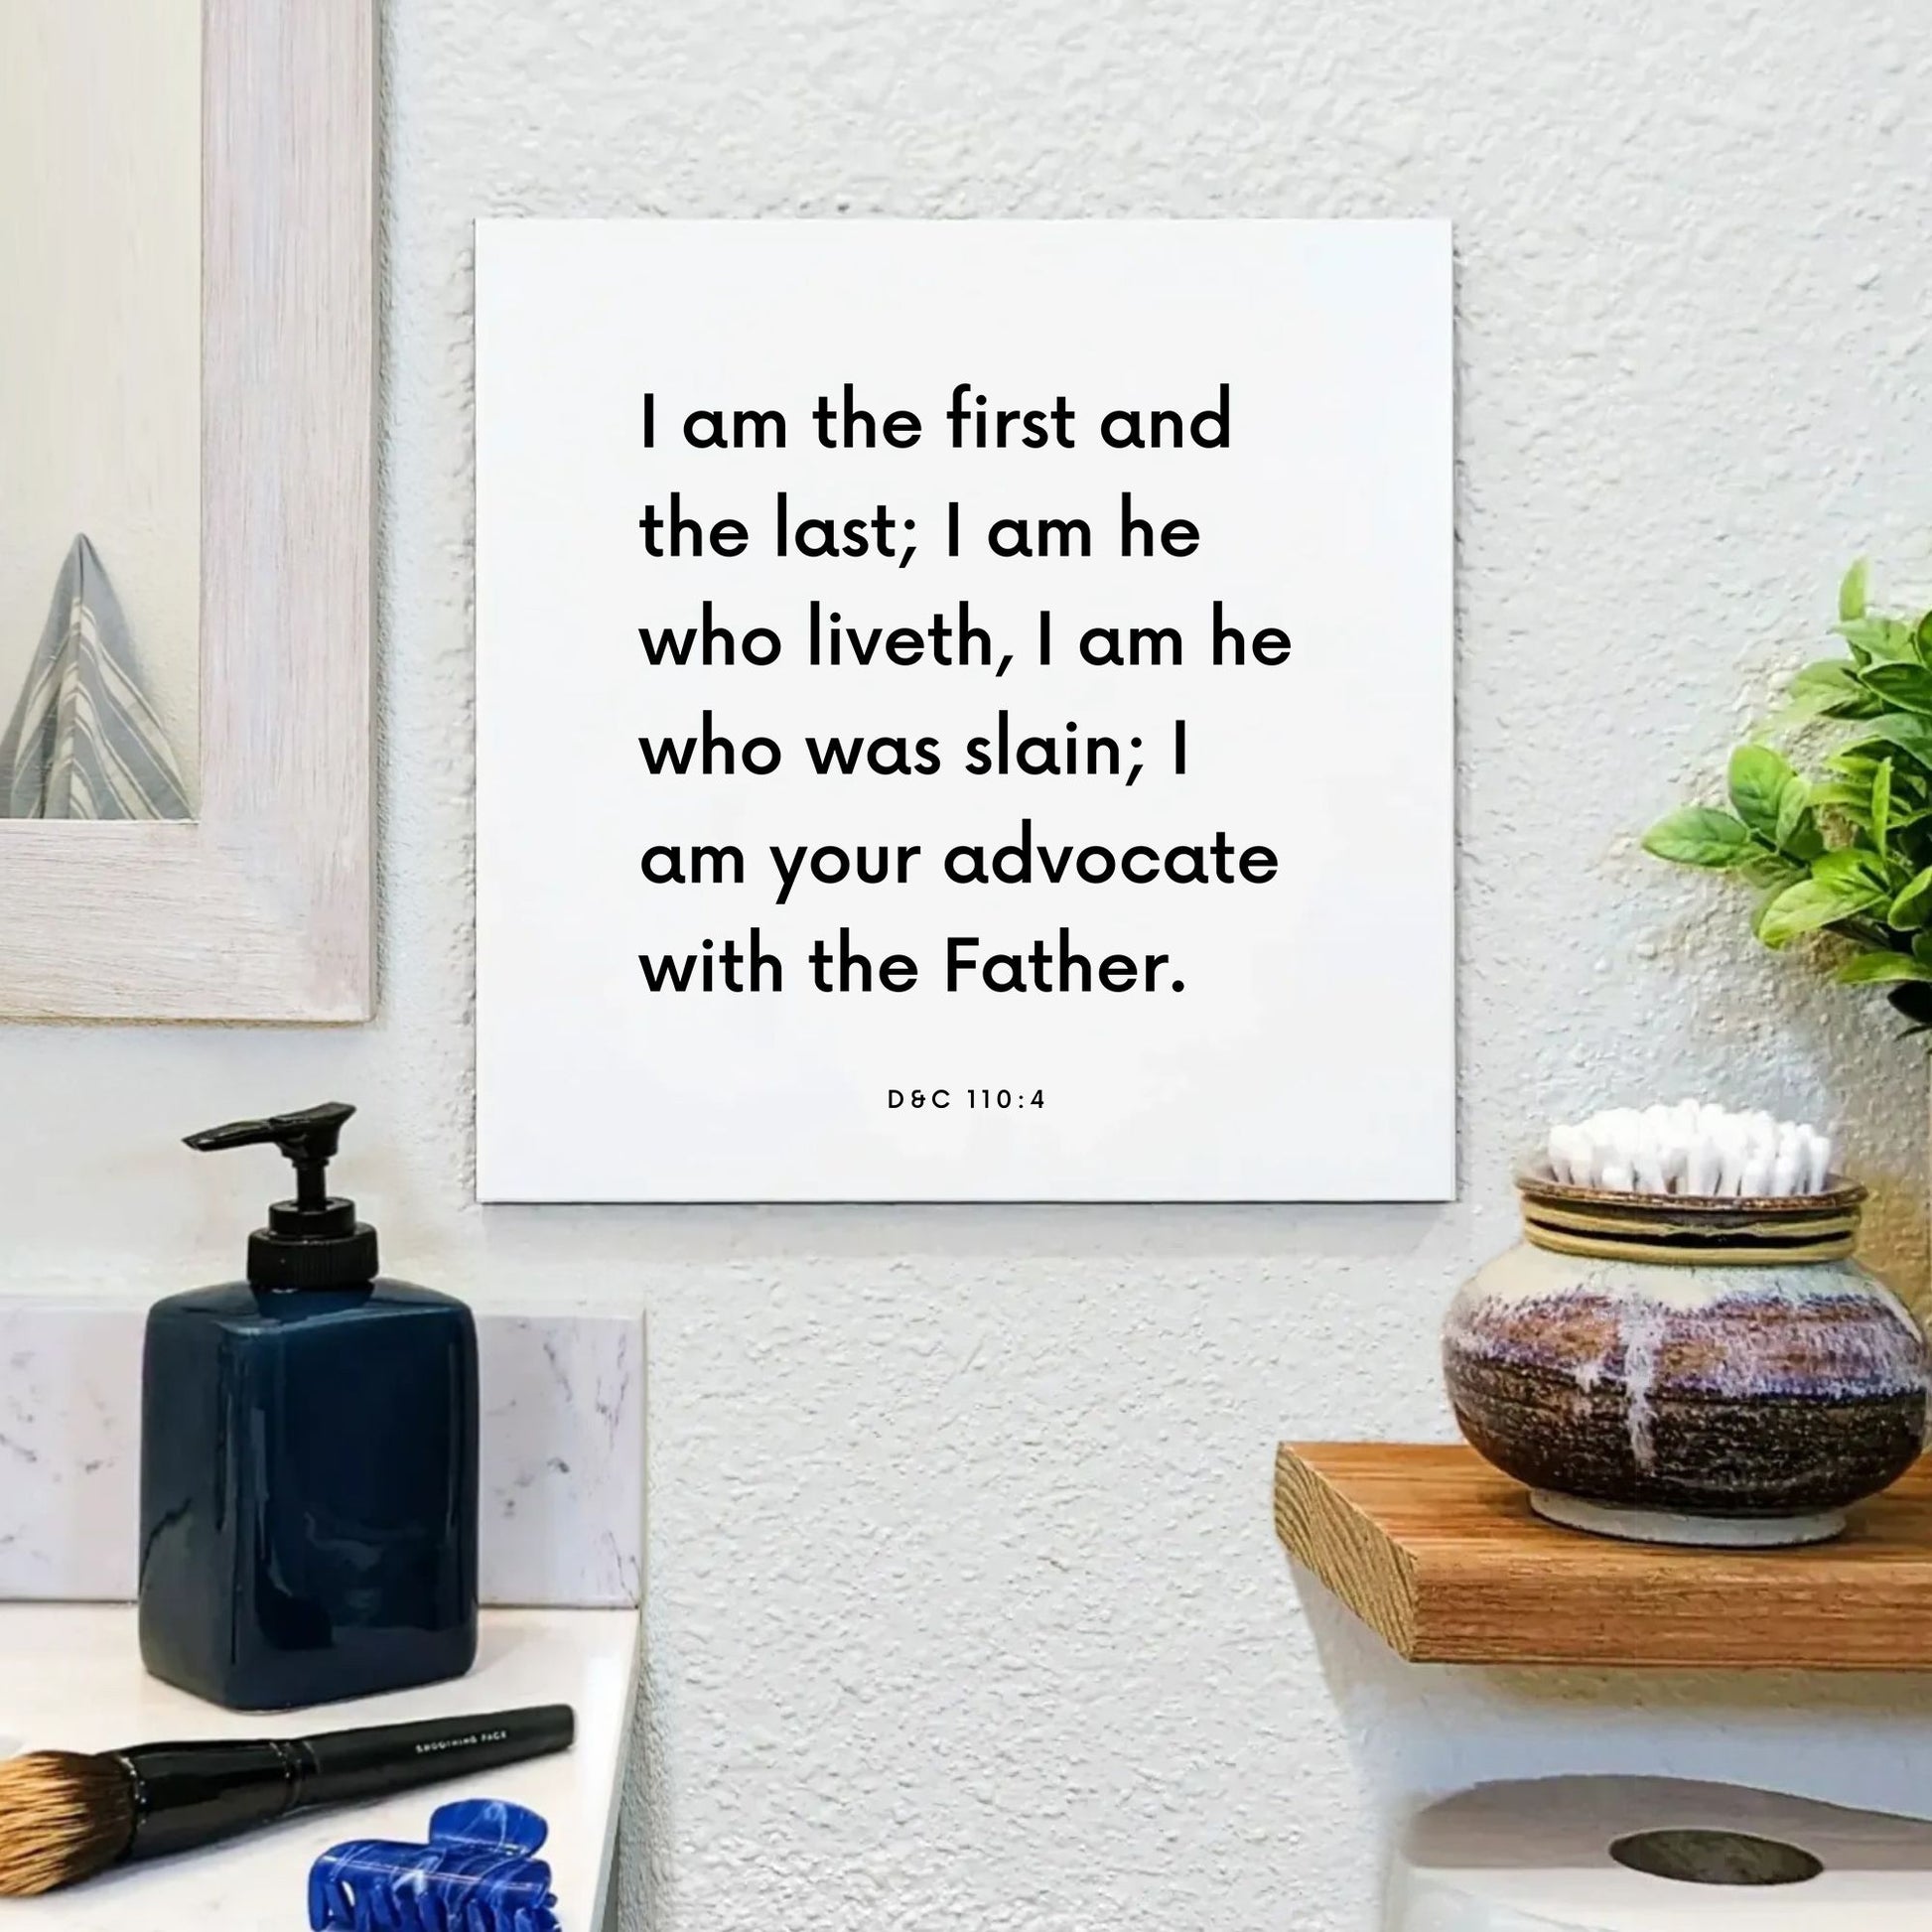 Bathroom mouting of the scripture tile for D&C 110:4 - "I am your advocate with the Father"